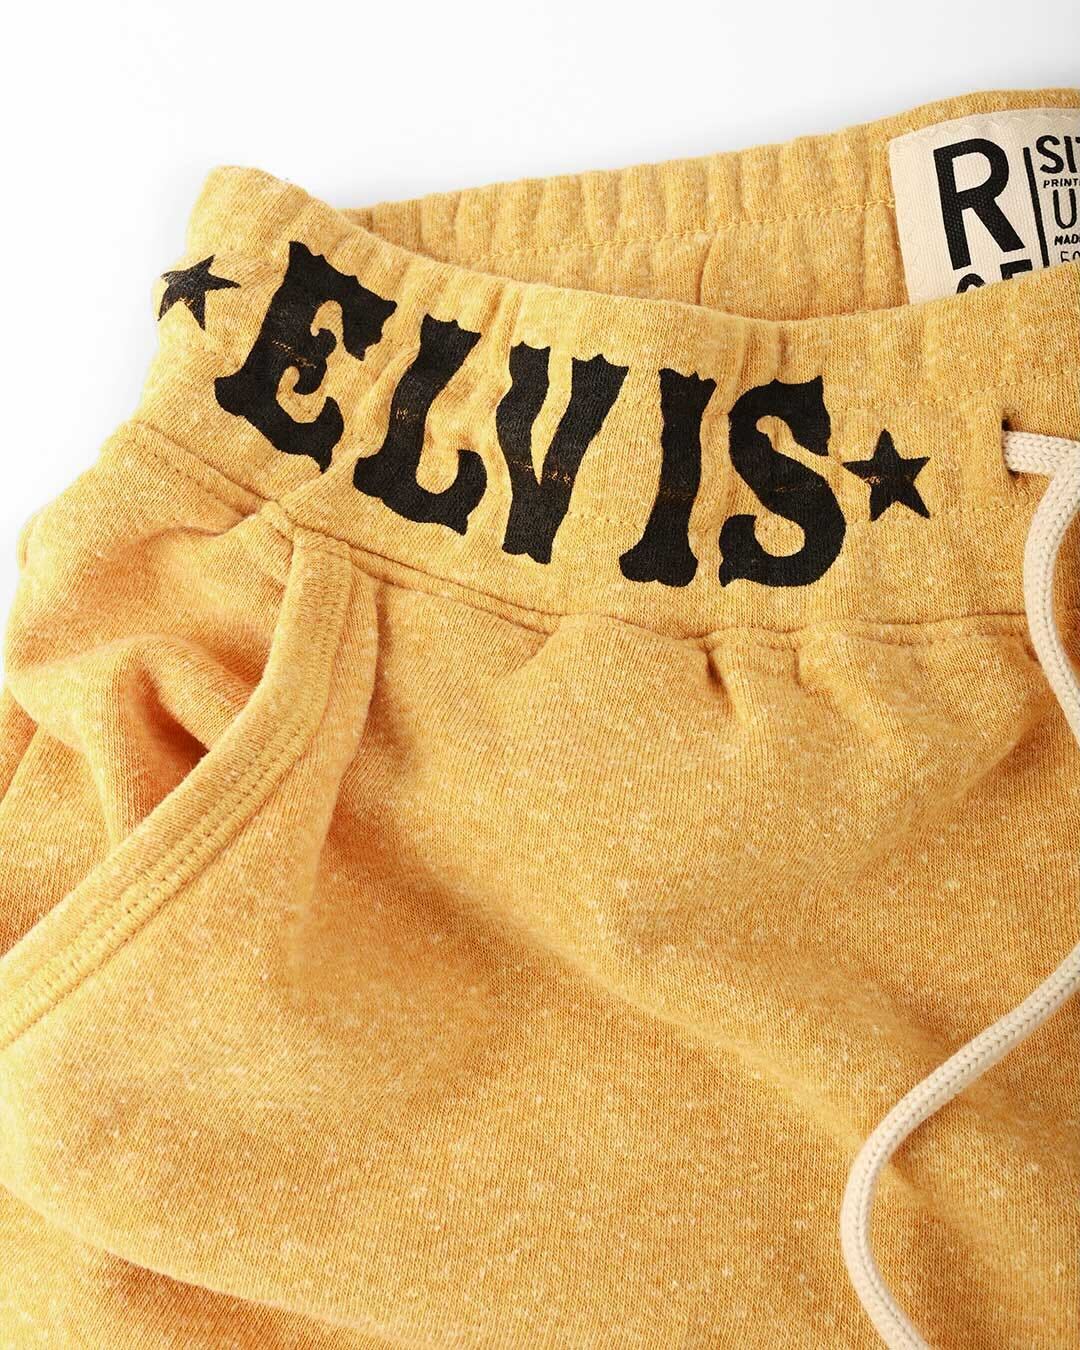 Elvis Presley TCB Gold Shorts - Roots of Fight Canada